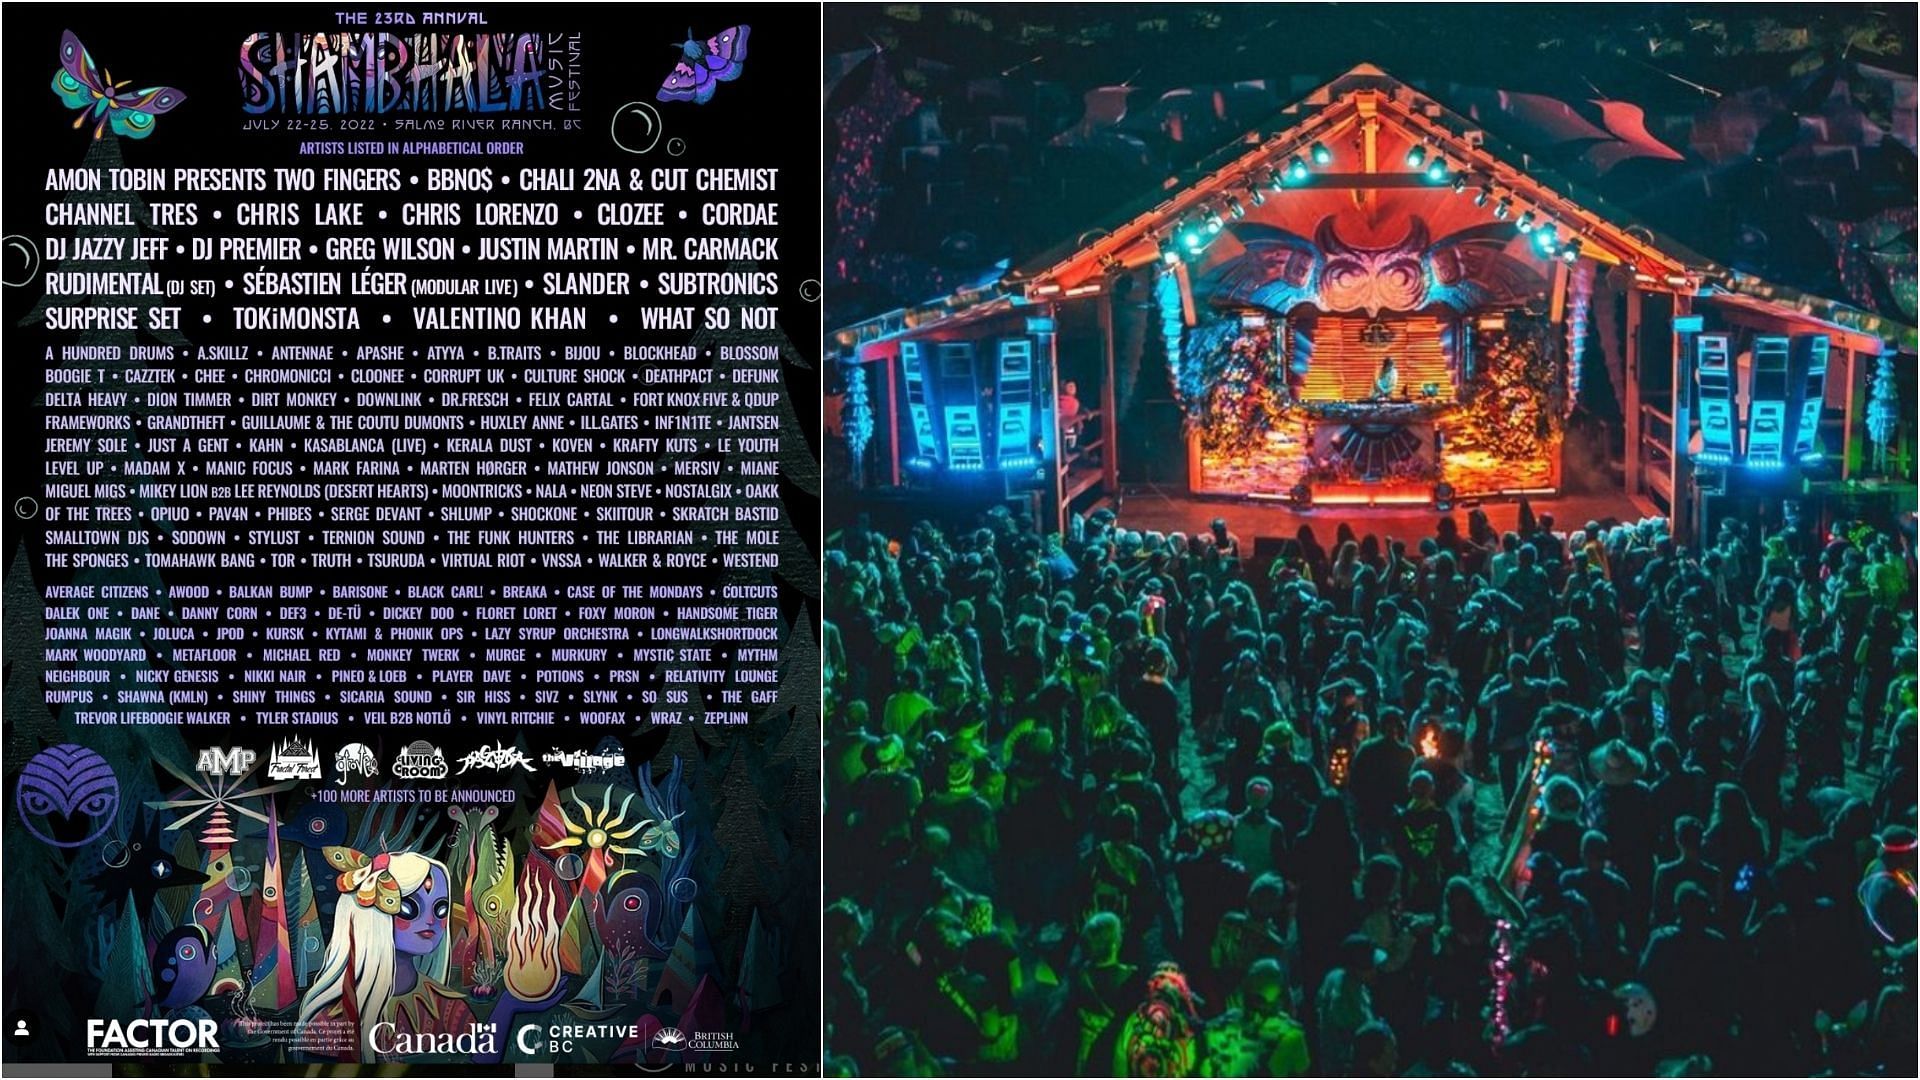 Shambhala Music Festival 2022 Lineup, tickets, price, dates and more